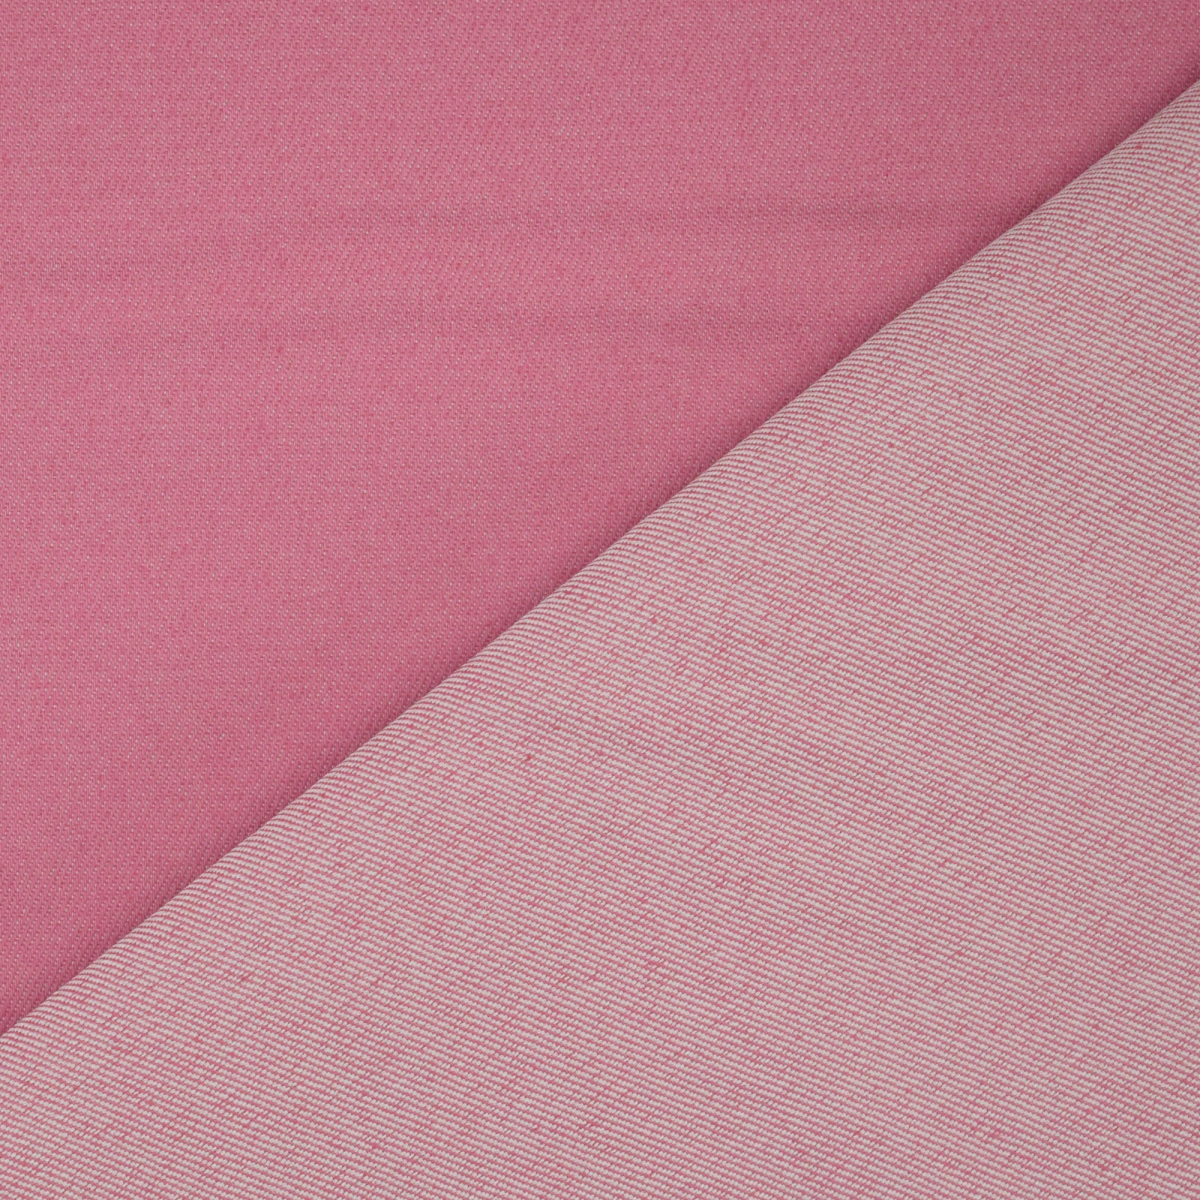 Pure Cotton Pink Denim Fabric Thick Clothing Fabric Diy Shoes Made